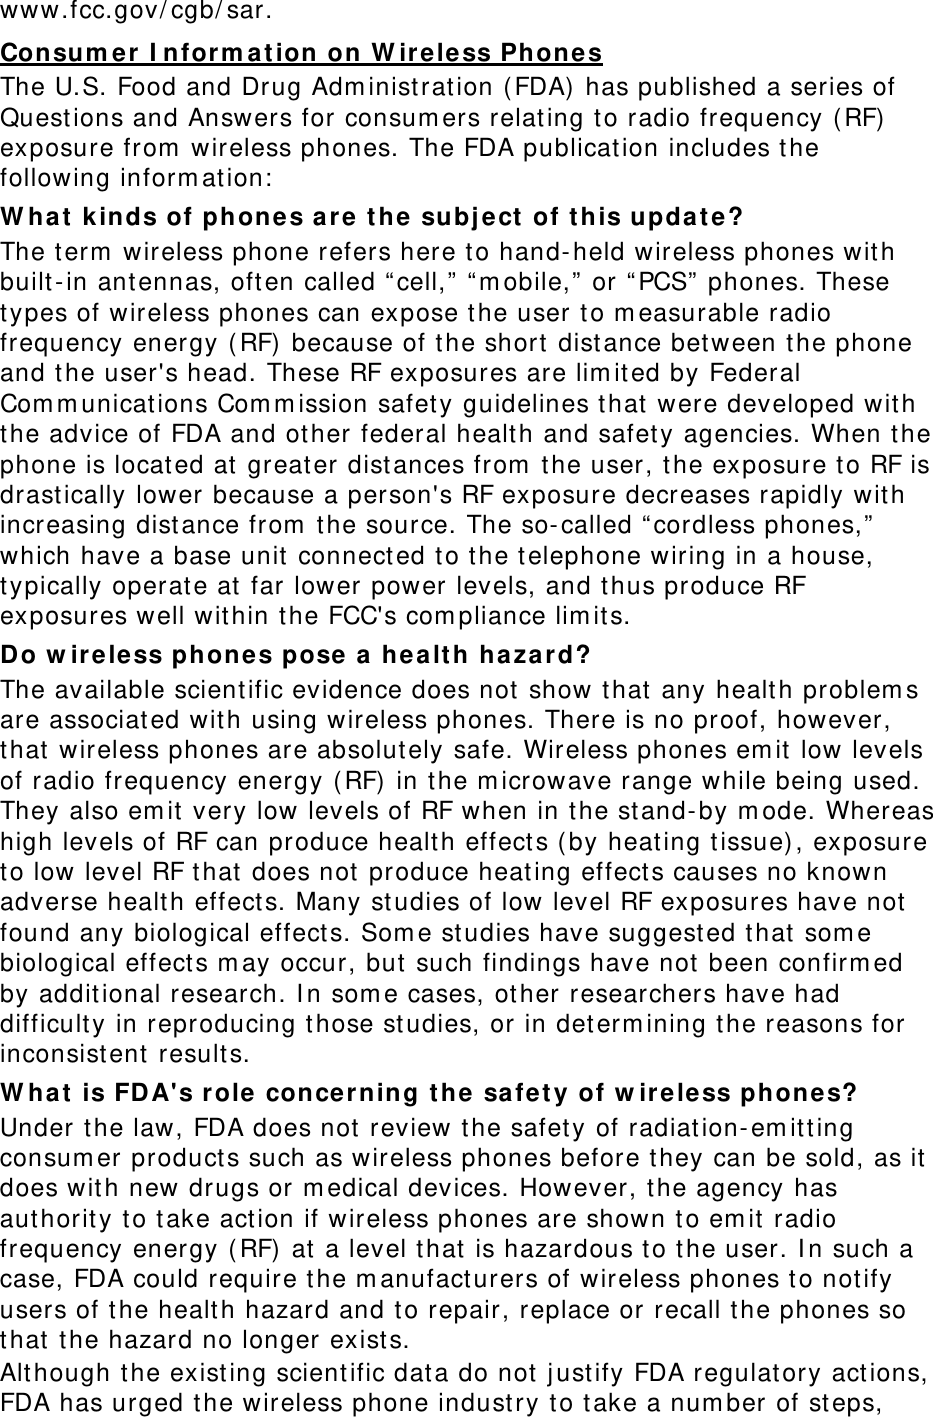 www.fcc.gov/ cgb/ sar. Consum er I nform a tion on W irele ss Phones The U.S. Food and Drug Adm inist ration ( FDA)  has published a series of Quest ions and Answers for consum ers relating t o radio frequency ( RF) exposure from  wireless phones. The FDA publication includes the following inform ation:  W ha t k in ds of phones ar e  t he subj ect  of t his upda t e? The t erm  wireless phone refers here to hand- held wireless phones with built- in antennas, often called “ cell,”  “ m obile,”  or “ PCS”  phones. These types of wireless phones can expose the user t o m easurable radio frequency energy ( RF) because of t he short  dist ance between t he phone and the user&apos;s head. These RF exposures are lim ited by Federal Com m unications Com m ission safety guidelines that  were developed wit h the advice of FDA and ot her federal health and safet y agencies. When t he phone is located at greater distances from  t he user, t he exposure to RF is drast ically lower because a person&apos;s RF exposure decreases rapidly with increasing dist ance from  t he source. The so- called “ cordless phones,”  which have a base unit connect ed t o the t elephone wiring in a house, typically operate at far lower power levels, and t hus produce RF exposures well wit hin the FCC&apos;s com pliance lim it s. Do w ireless phones pose  a  he a lt h haza rd? The available scient ific evidence does not show t hat any health problem s are associated with using wireless phones. There is no proof, however, that  wireless phones are absolutely safe. Wireless phones em it low levels of radio frequency energy ( RF)  in the m icrowave range while being used. They also em it  very low levels of RF when in t he stand- by m ode. Whereas high levels of RF can produce health effect s ( by heating t issue), exposure to low level RF that  does not produce heat ing effect s causes no known adverse health effect s. Many studies of low level RF exposures have not found any biological effect s. Som e studies have suggest ed t hat som e biological effect s m ay occur, but  such findings have not been confirm ed by additional research. I n som e cases, other researchers have had difficulty in reproducing those studies, or in determ ining t he reasons for inconsistent result s. W ha t is FDA&apos;s role  concerning t he  safet y of w ireless phones? Under t he law, FDA does not  review t he safety of radiation- em itt ing consum er products such as wireless phones before t hey can be sold, as it  does wit h new drugs or m edical devices. However, t he agency has aut hority to t ake act ion if wireless phones are shown t o em it  radio frequency energy ( RF) at a level t hat is hazardous t o t he user. I n such a case, FDA could require t he m anufact urers of wireless phones to notify users of t he health hazard and t o repair, replace or recall t he phones so that  t he hazard no longer exists. Alt hough t he existing scient ific data do not j ustify FDA regulat ory act ions, FDA has urged t he wireless phone industry t o t ake a num ber of st eps, 